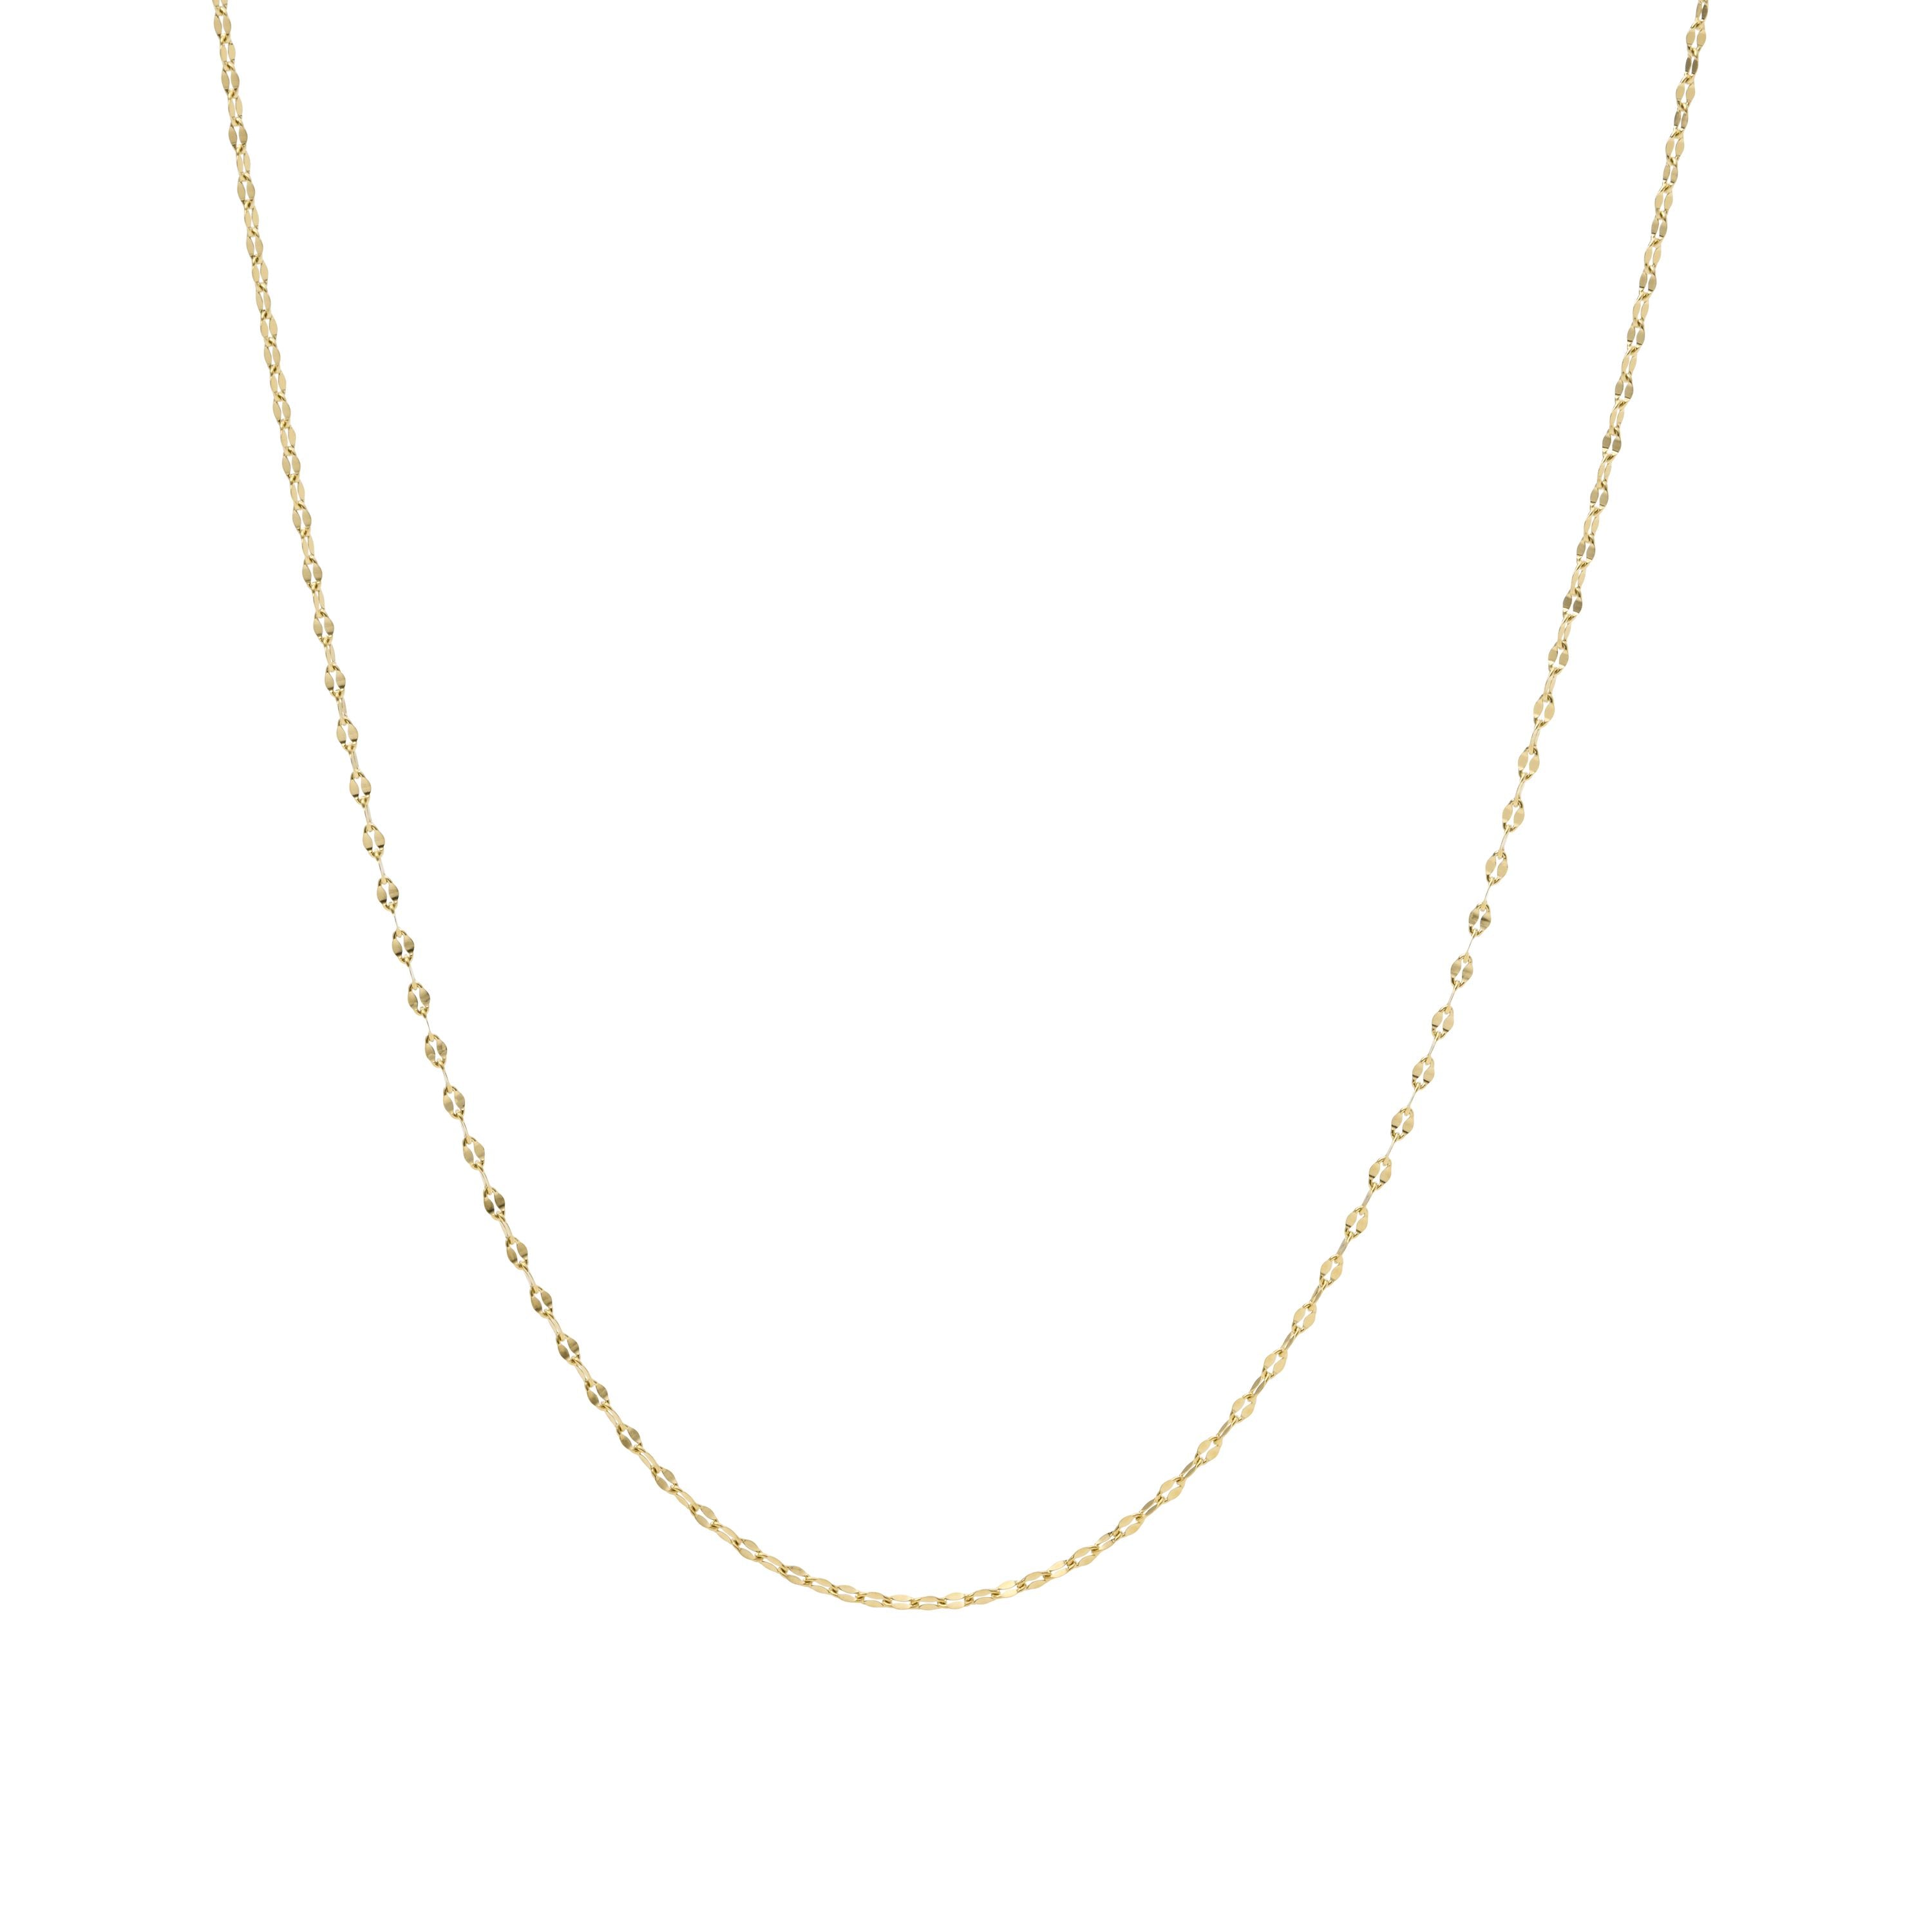 Shop Fossil Women's Oh So Charming Gold-tone Stainless Steel Chain Necklace